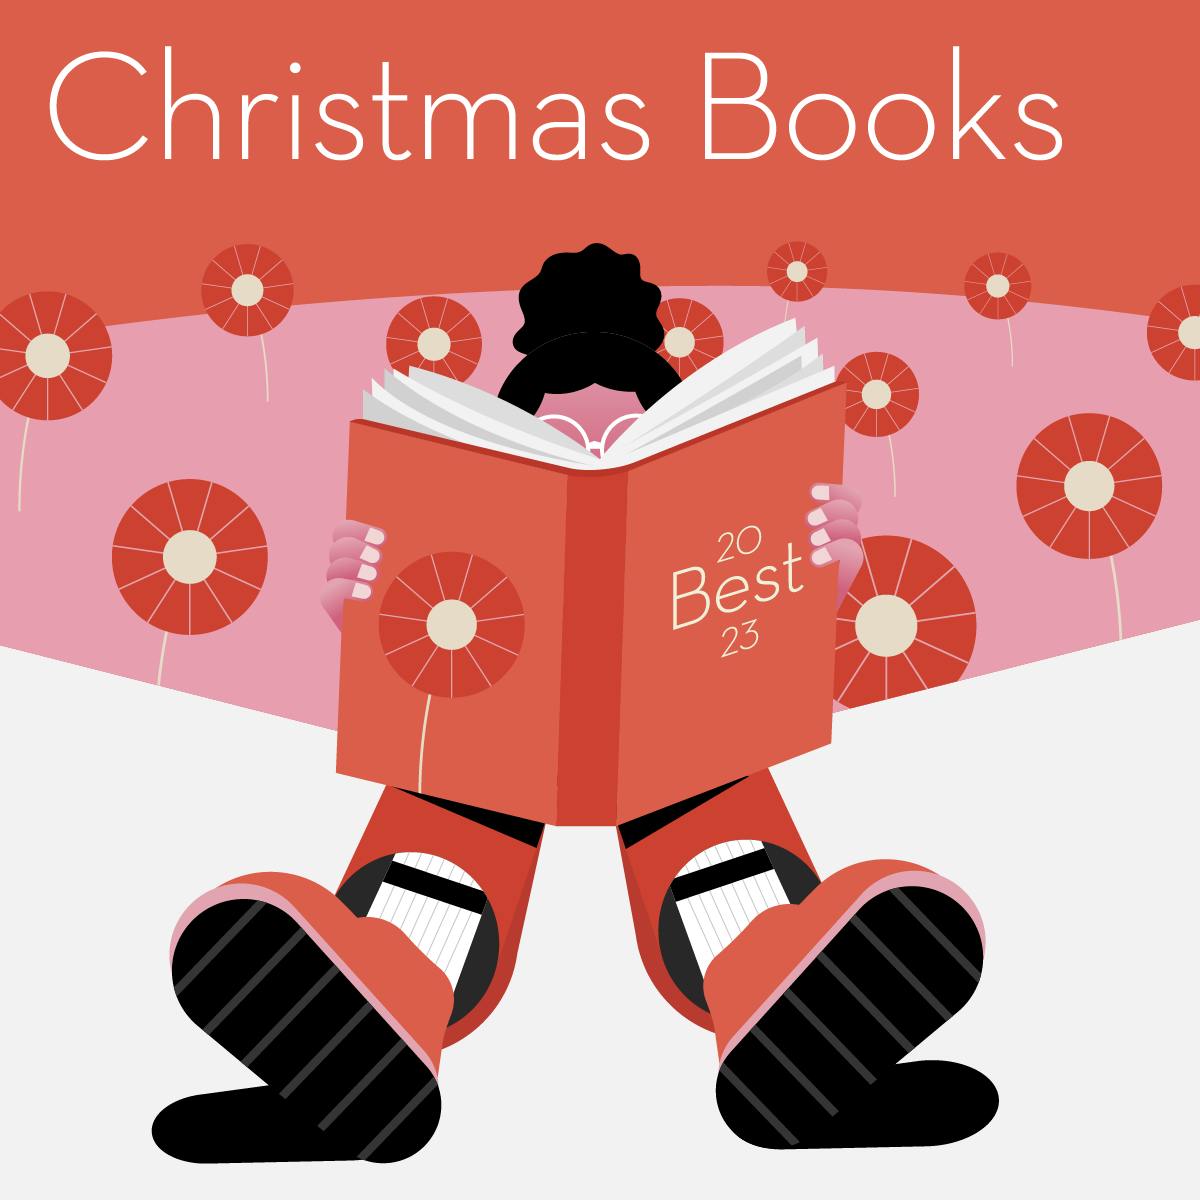 Illustration of a gift guide for the best children’s holiday books for Christmas.